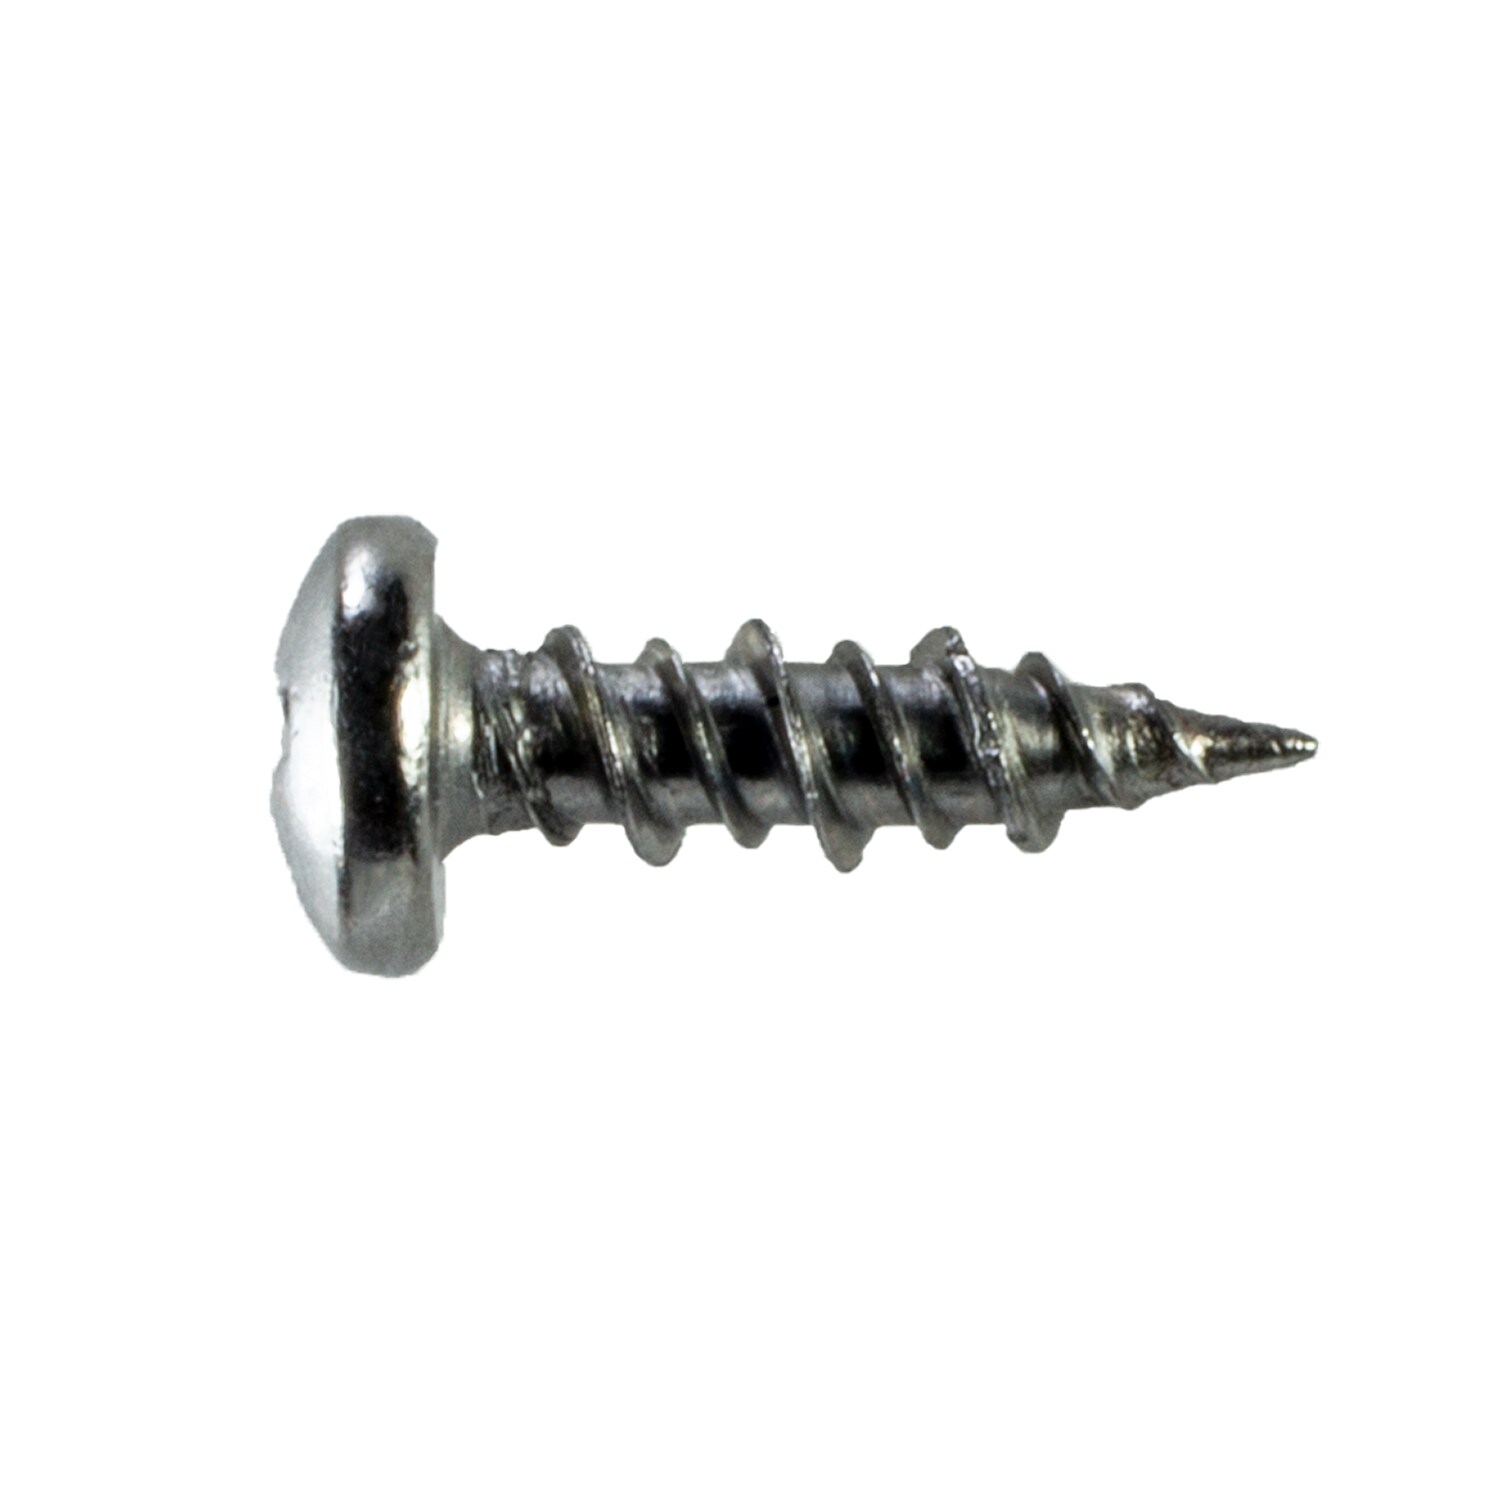 The Hillman Group 47104 6-Inch x 2-Inch Fine Thread Phillips Drive Drywall Screw 